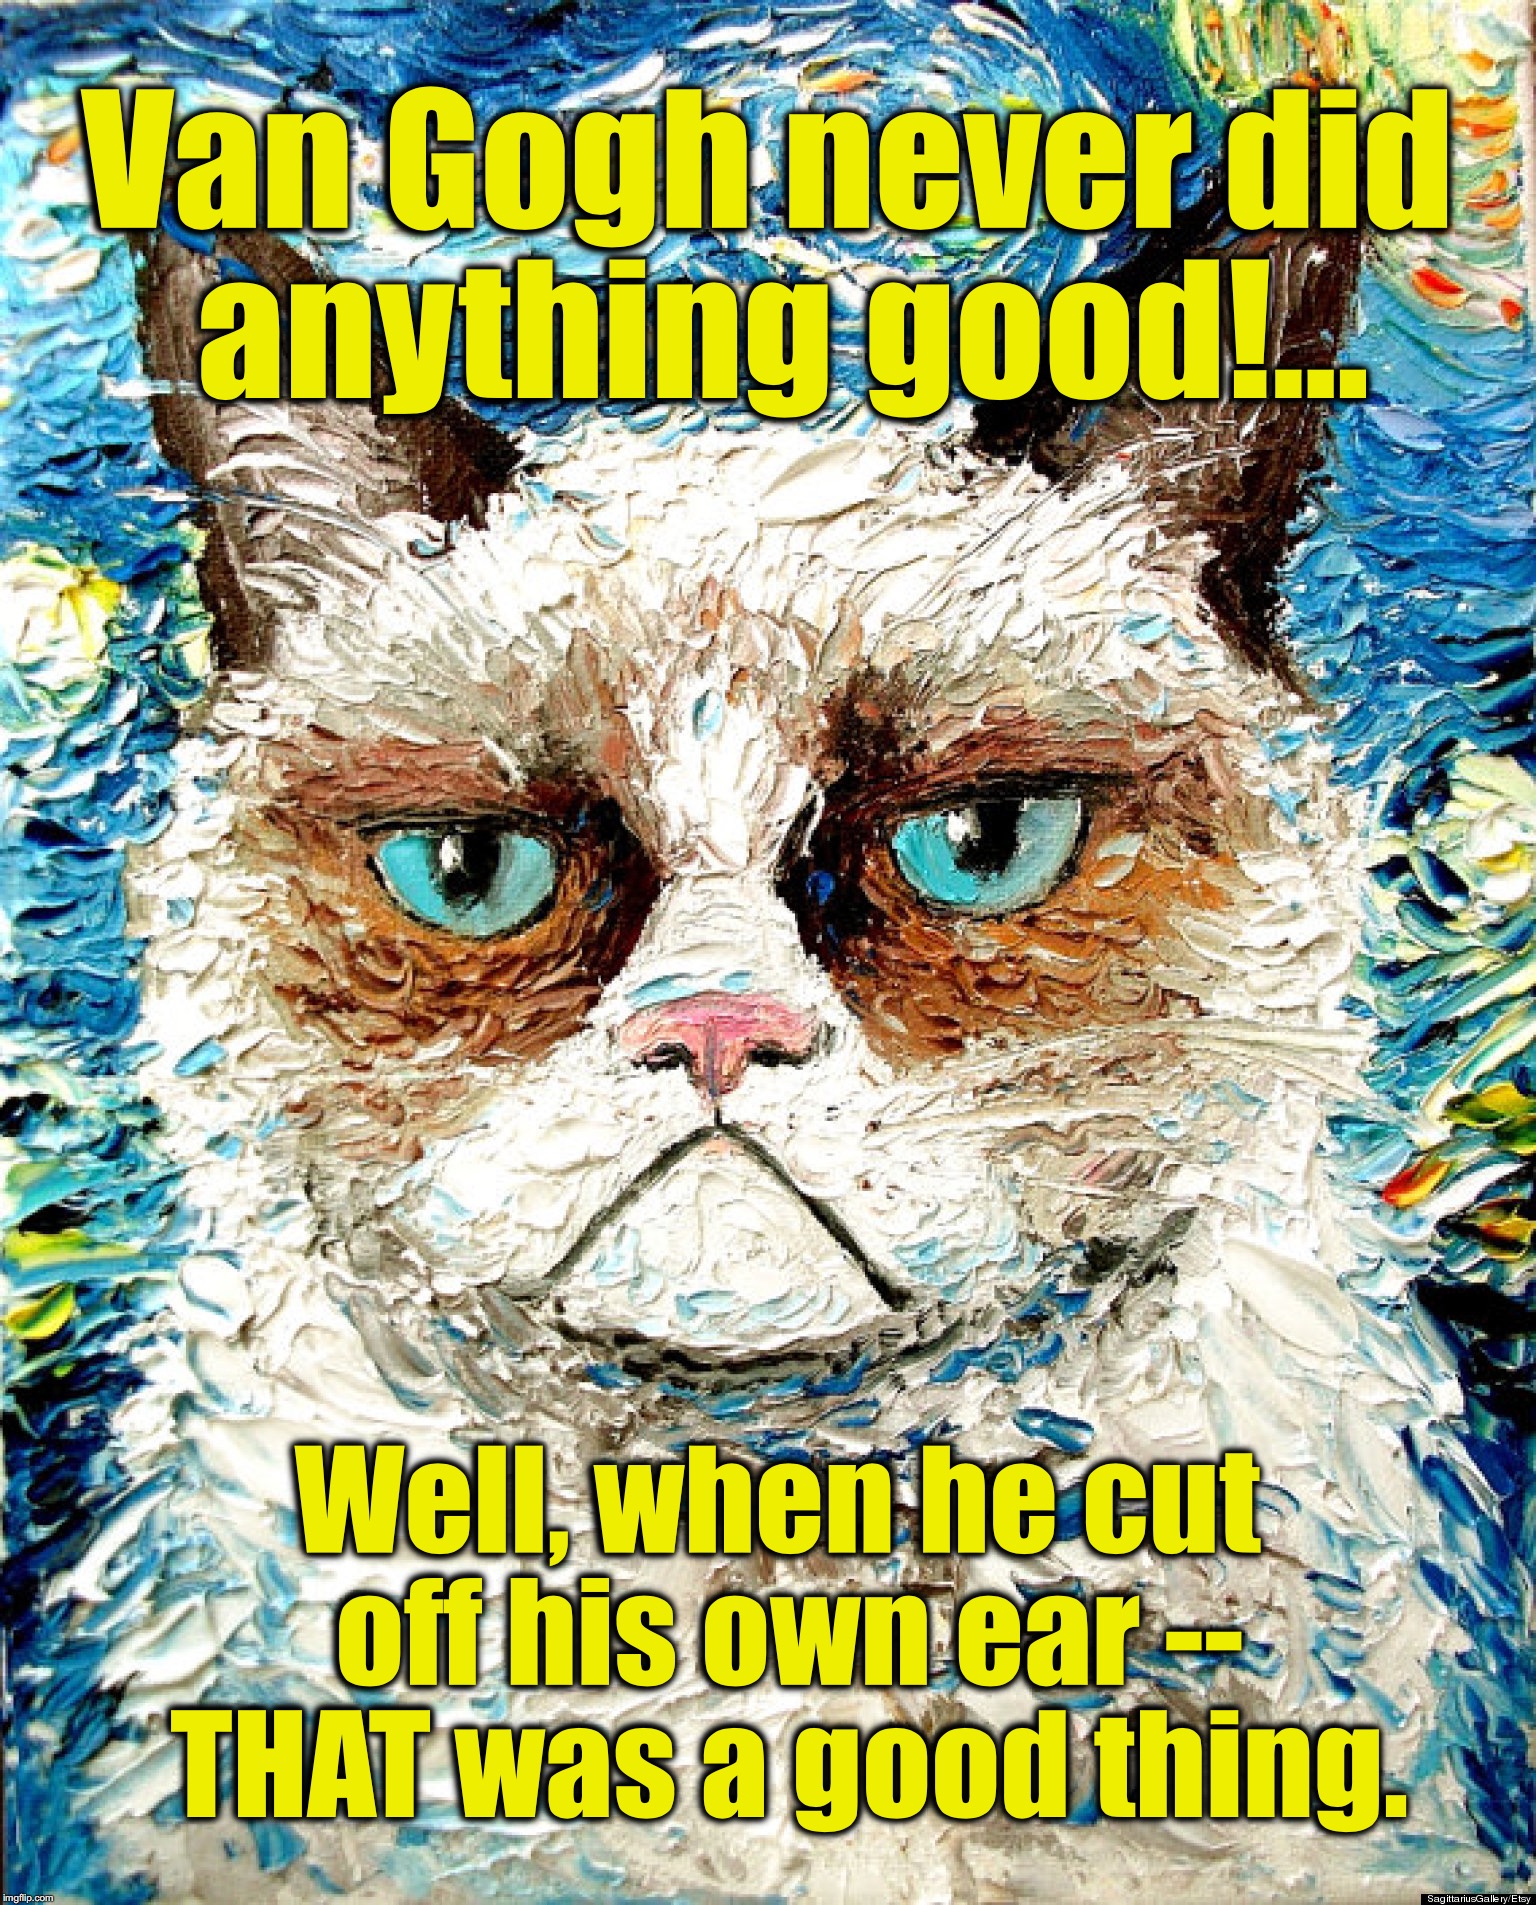 Vincent van Gato | Van Gogh never did anything good!... Well, when he cut off his own ear -- THAT was a good thing. | image tagged in vincent van gogh | made w/ Imgflip meme maker